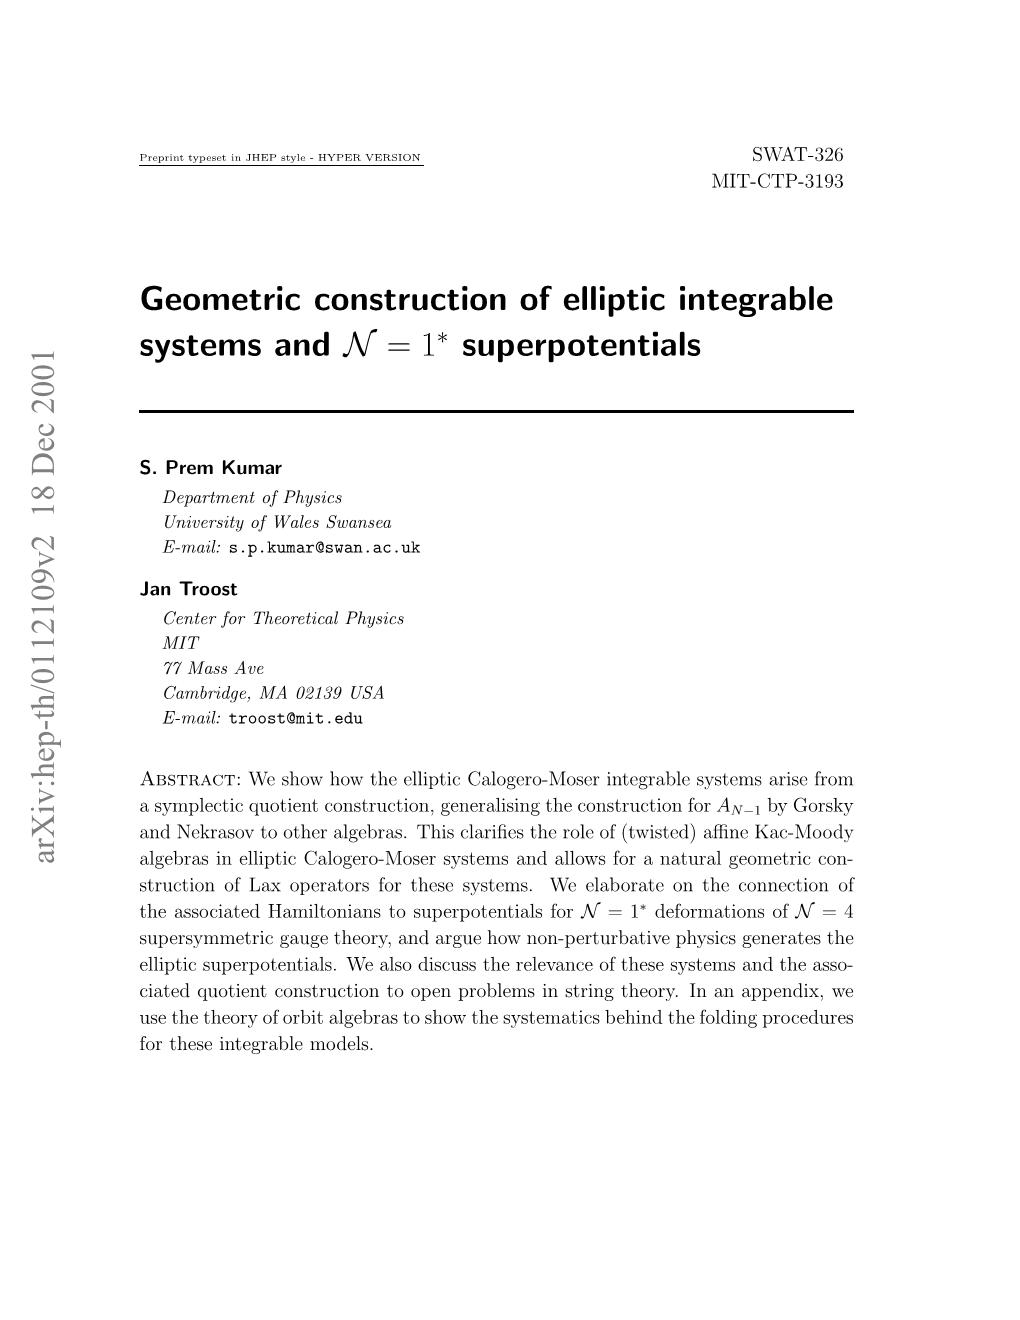 Geometric Construction of Elliptic Integrable Systems and N= 1